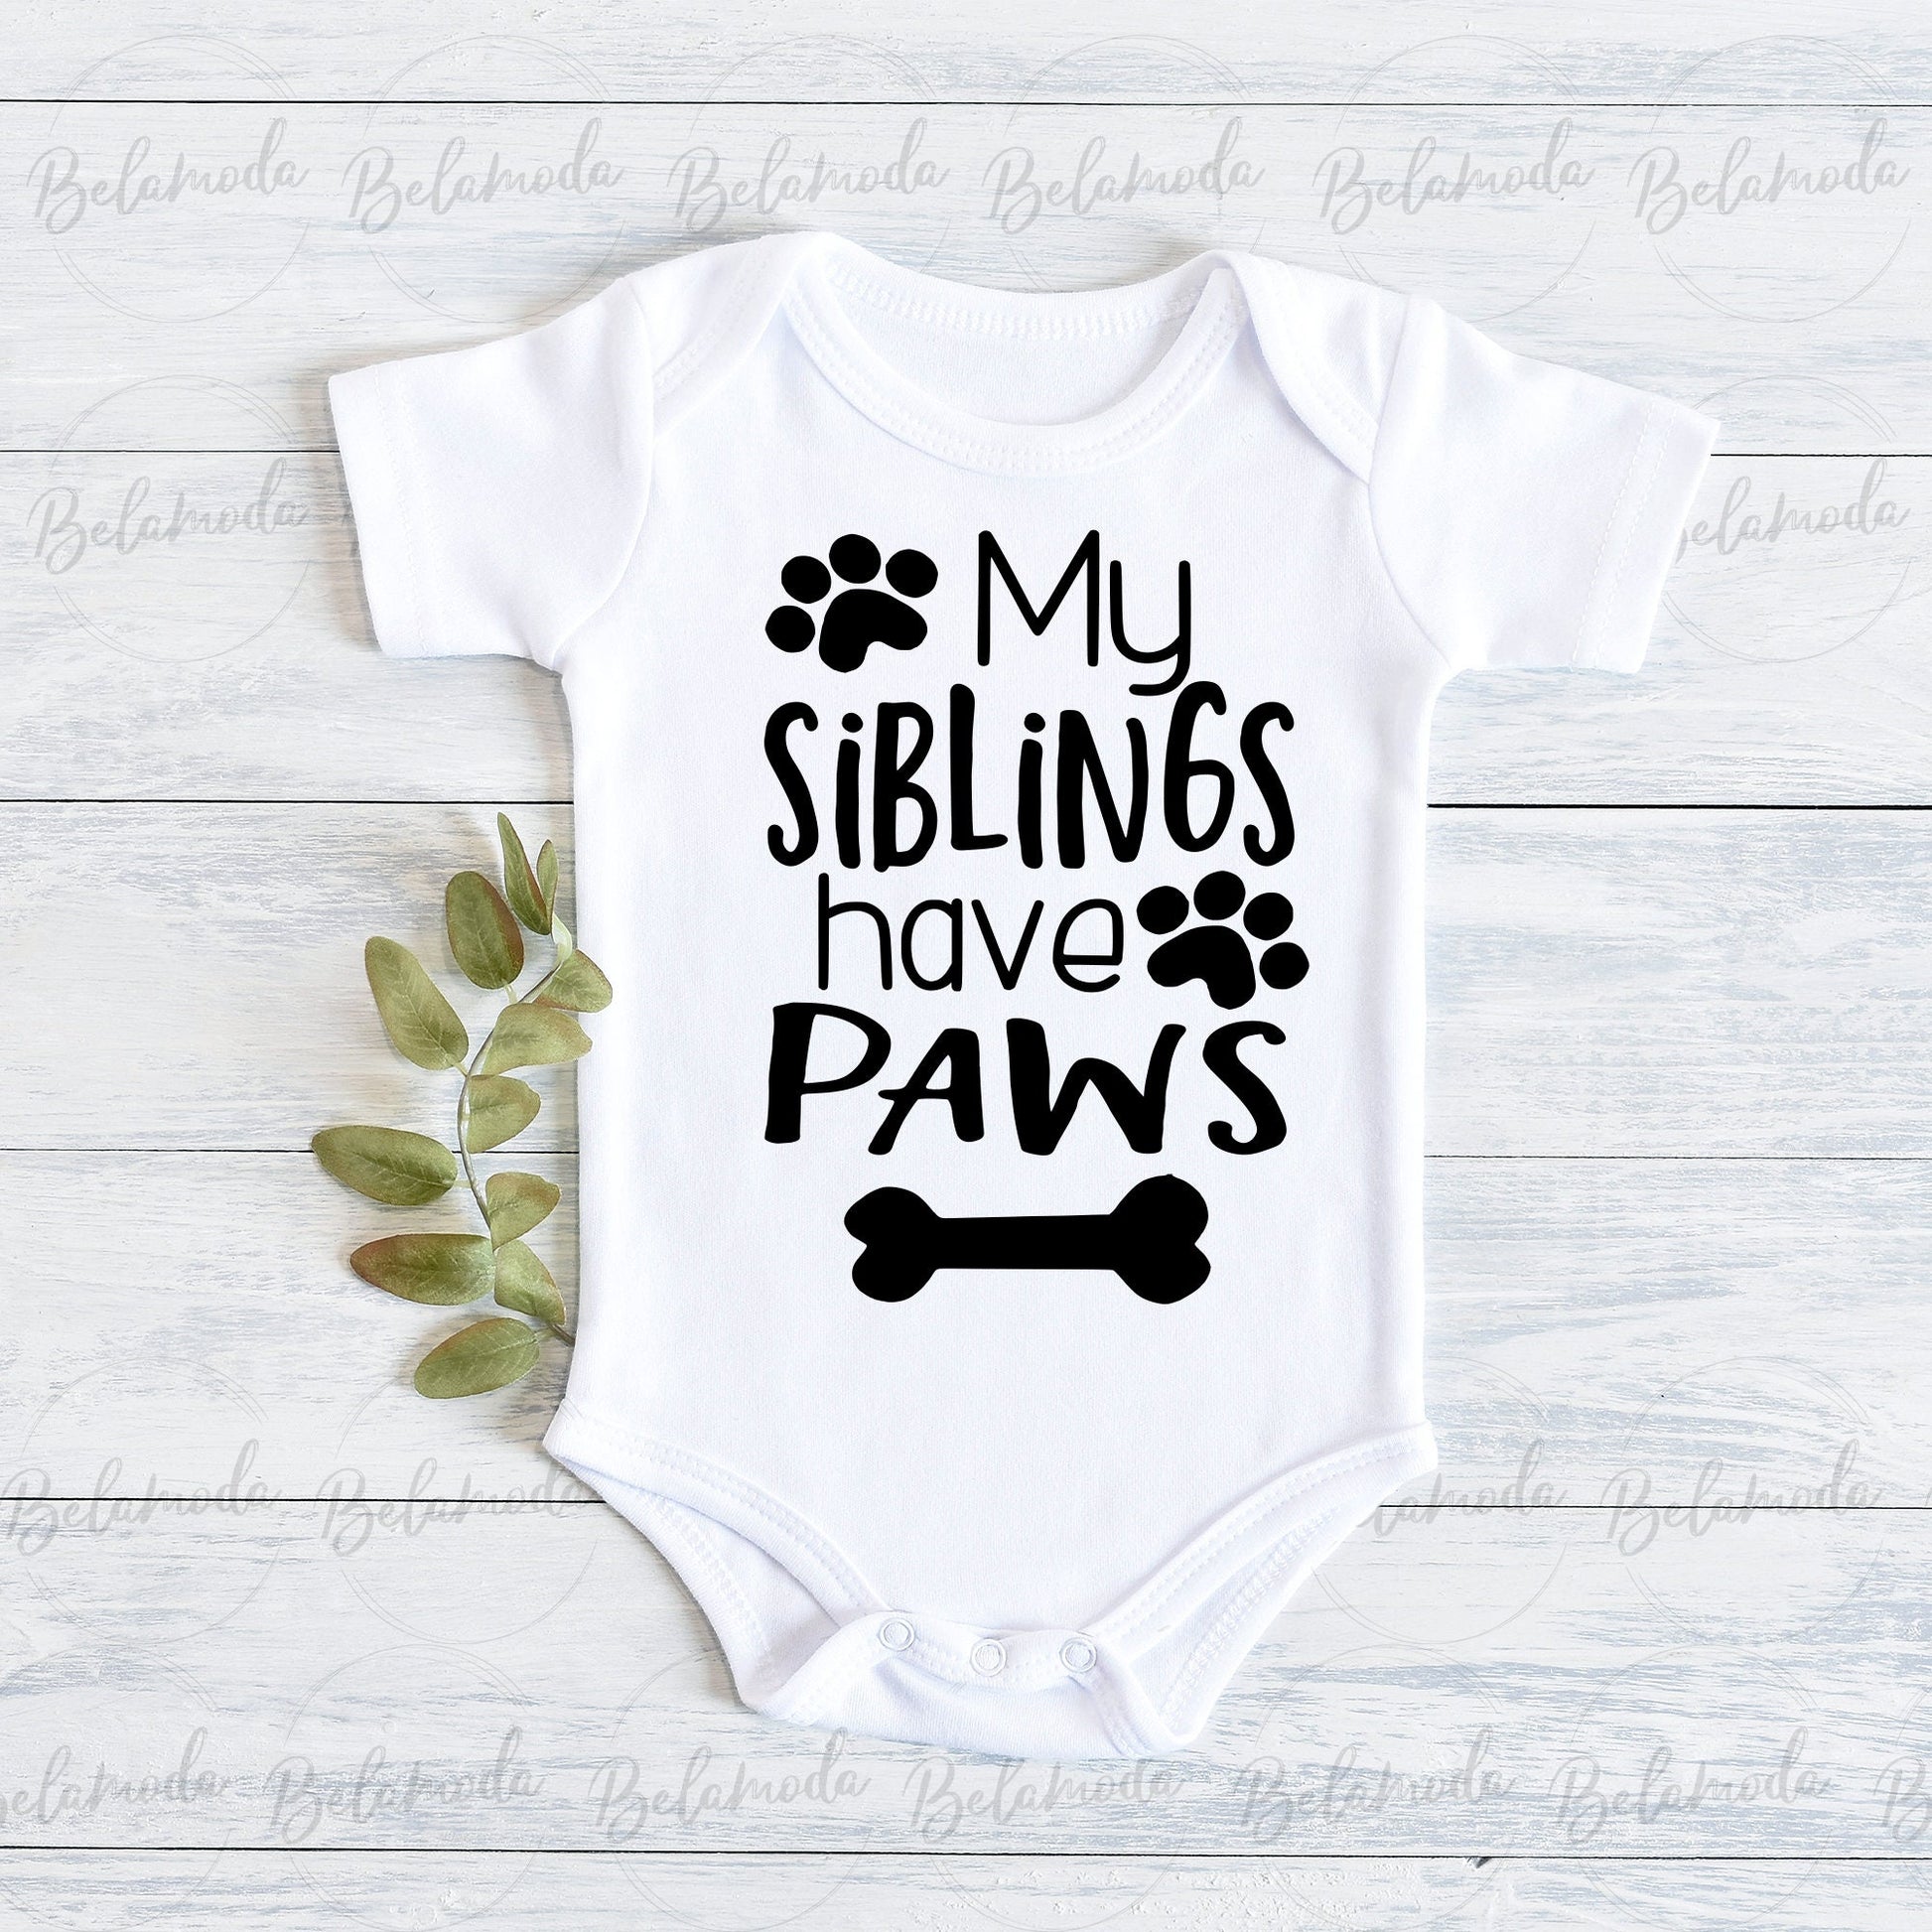 My Siblings have Paws Bodysuit, Cute Baby Bodysuits, Baby Shower Gifts, Cute Kids Shirts, Funny Baby Shirts, Funny Kids Shirts